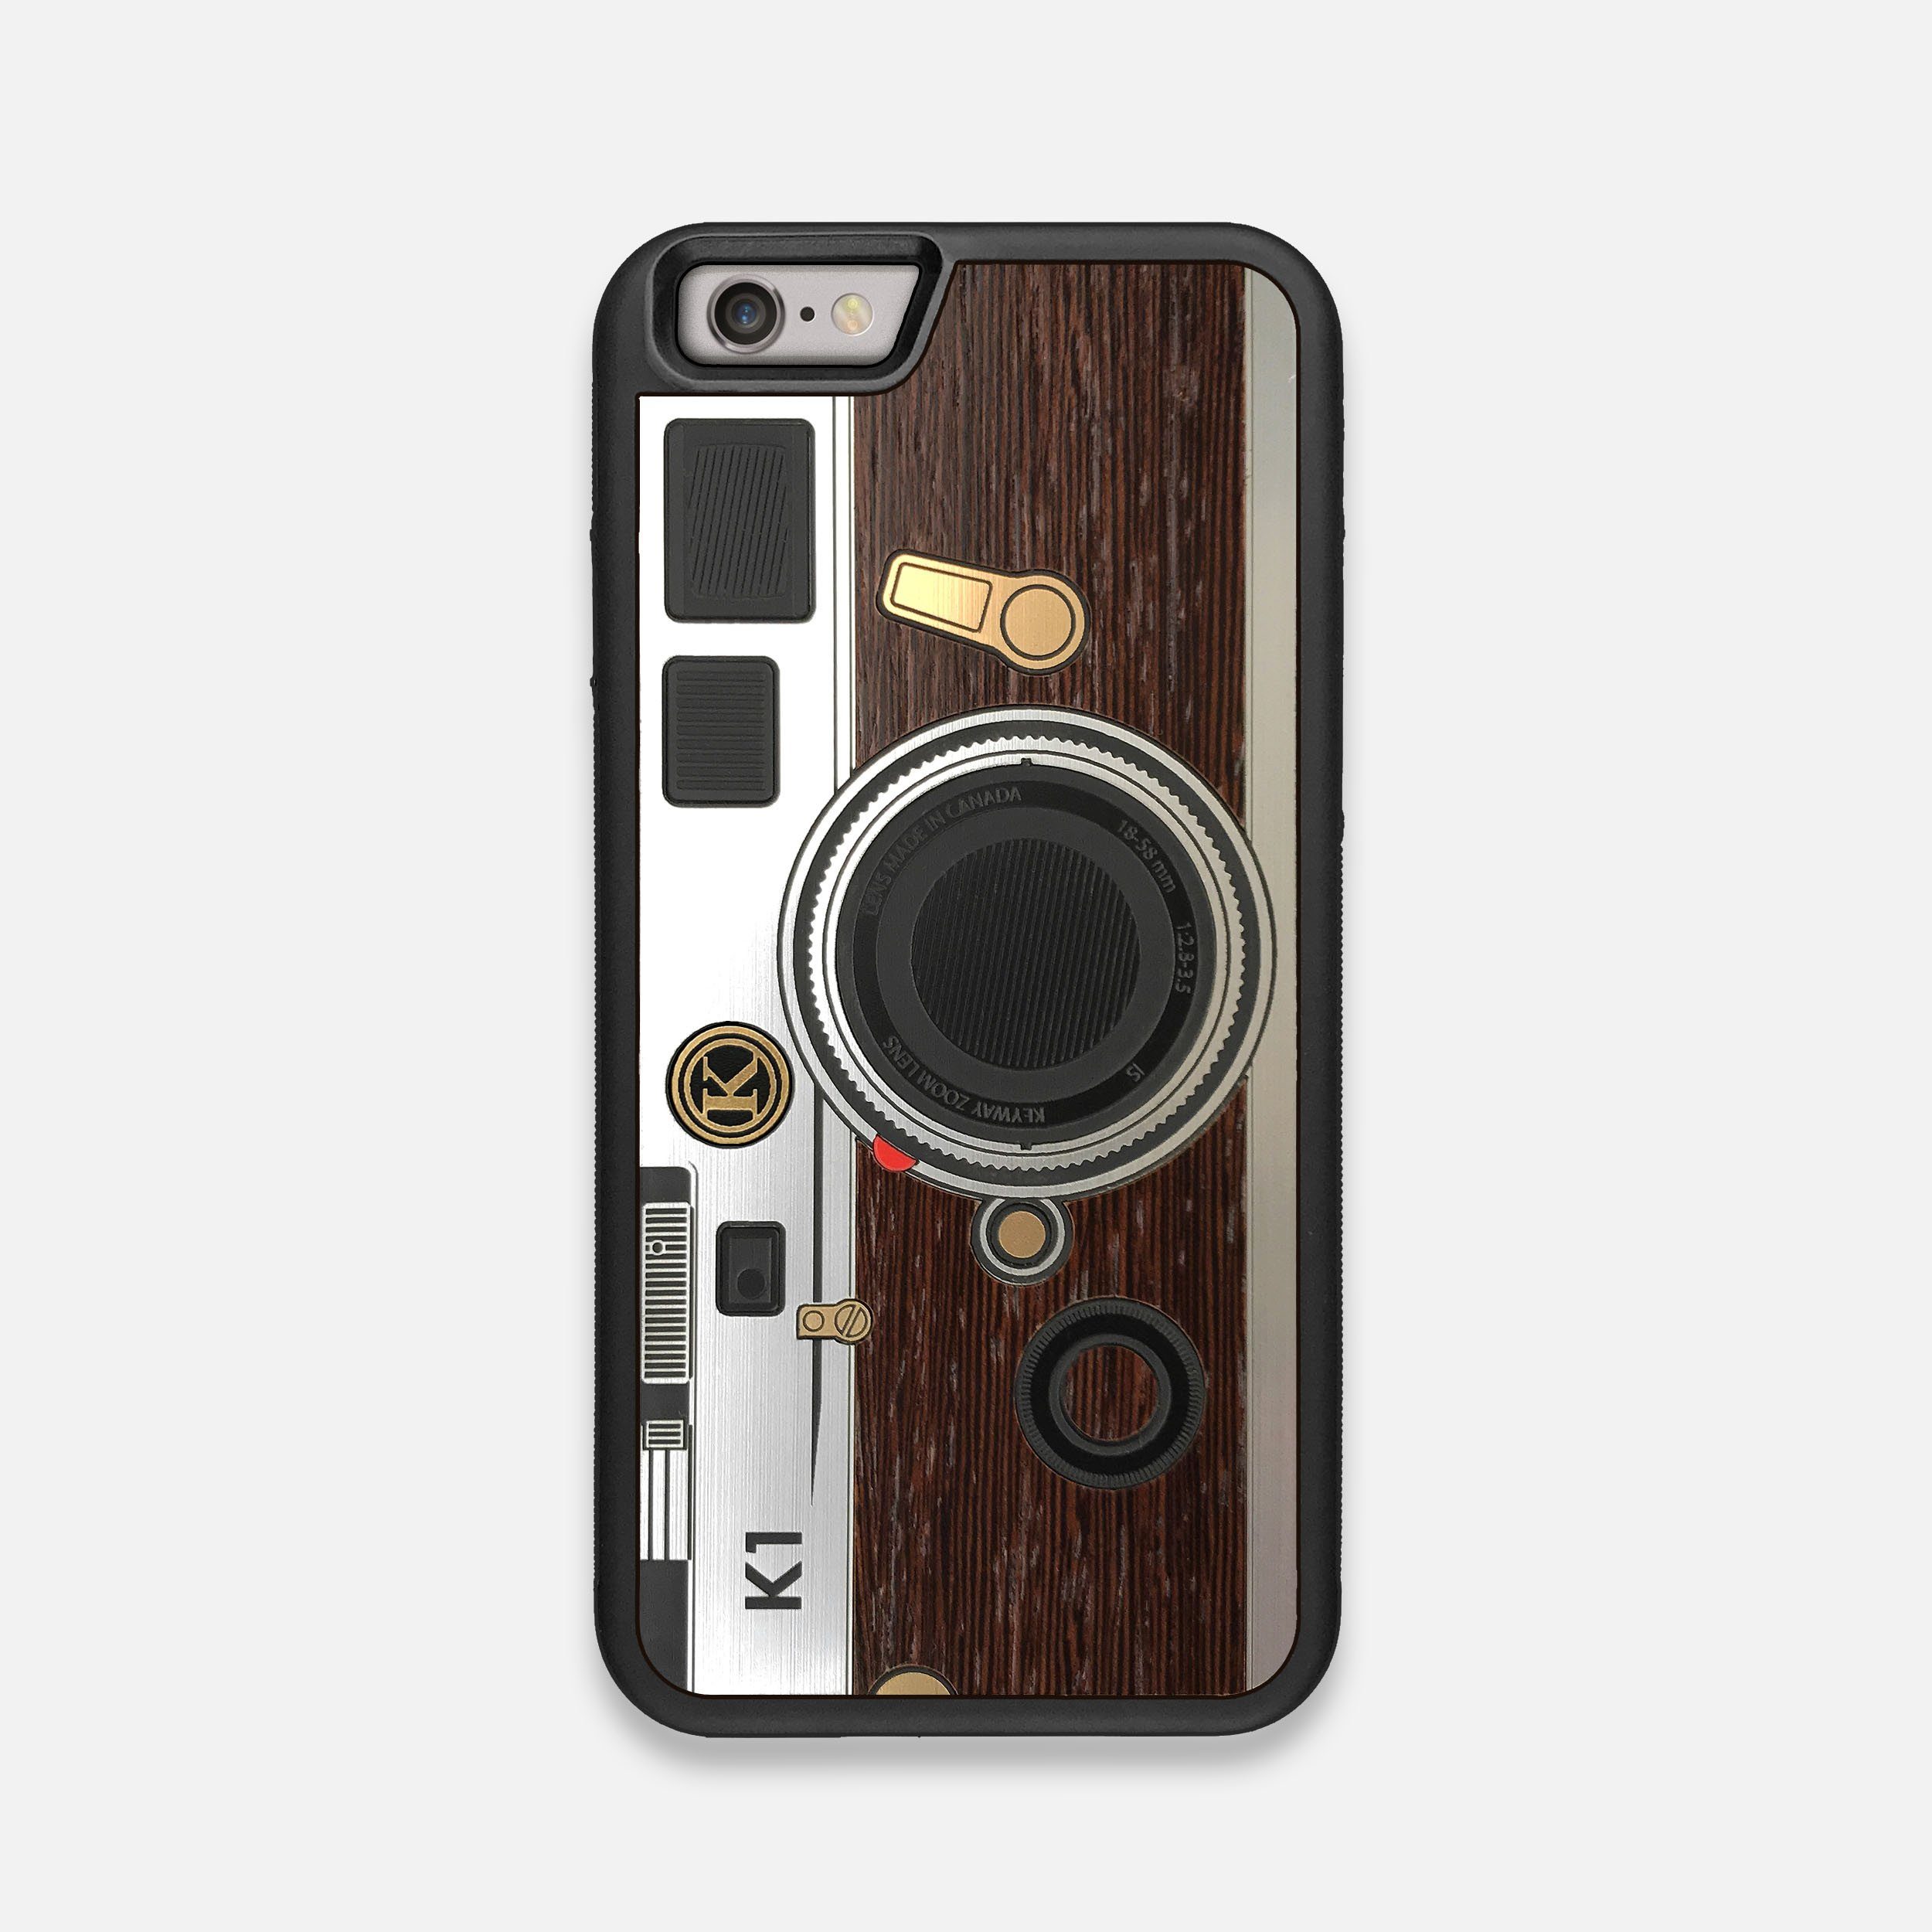 Front view of the classic Camera, silver metallic and wood iPhone 6 Case by Keyway Designs